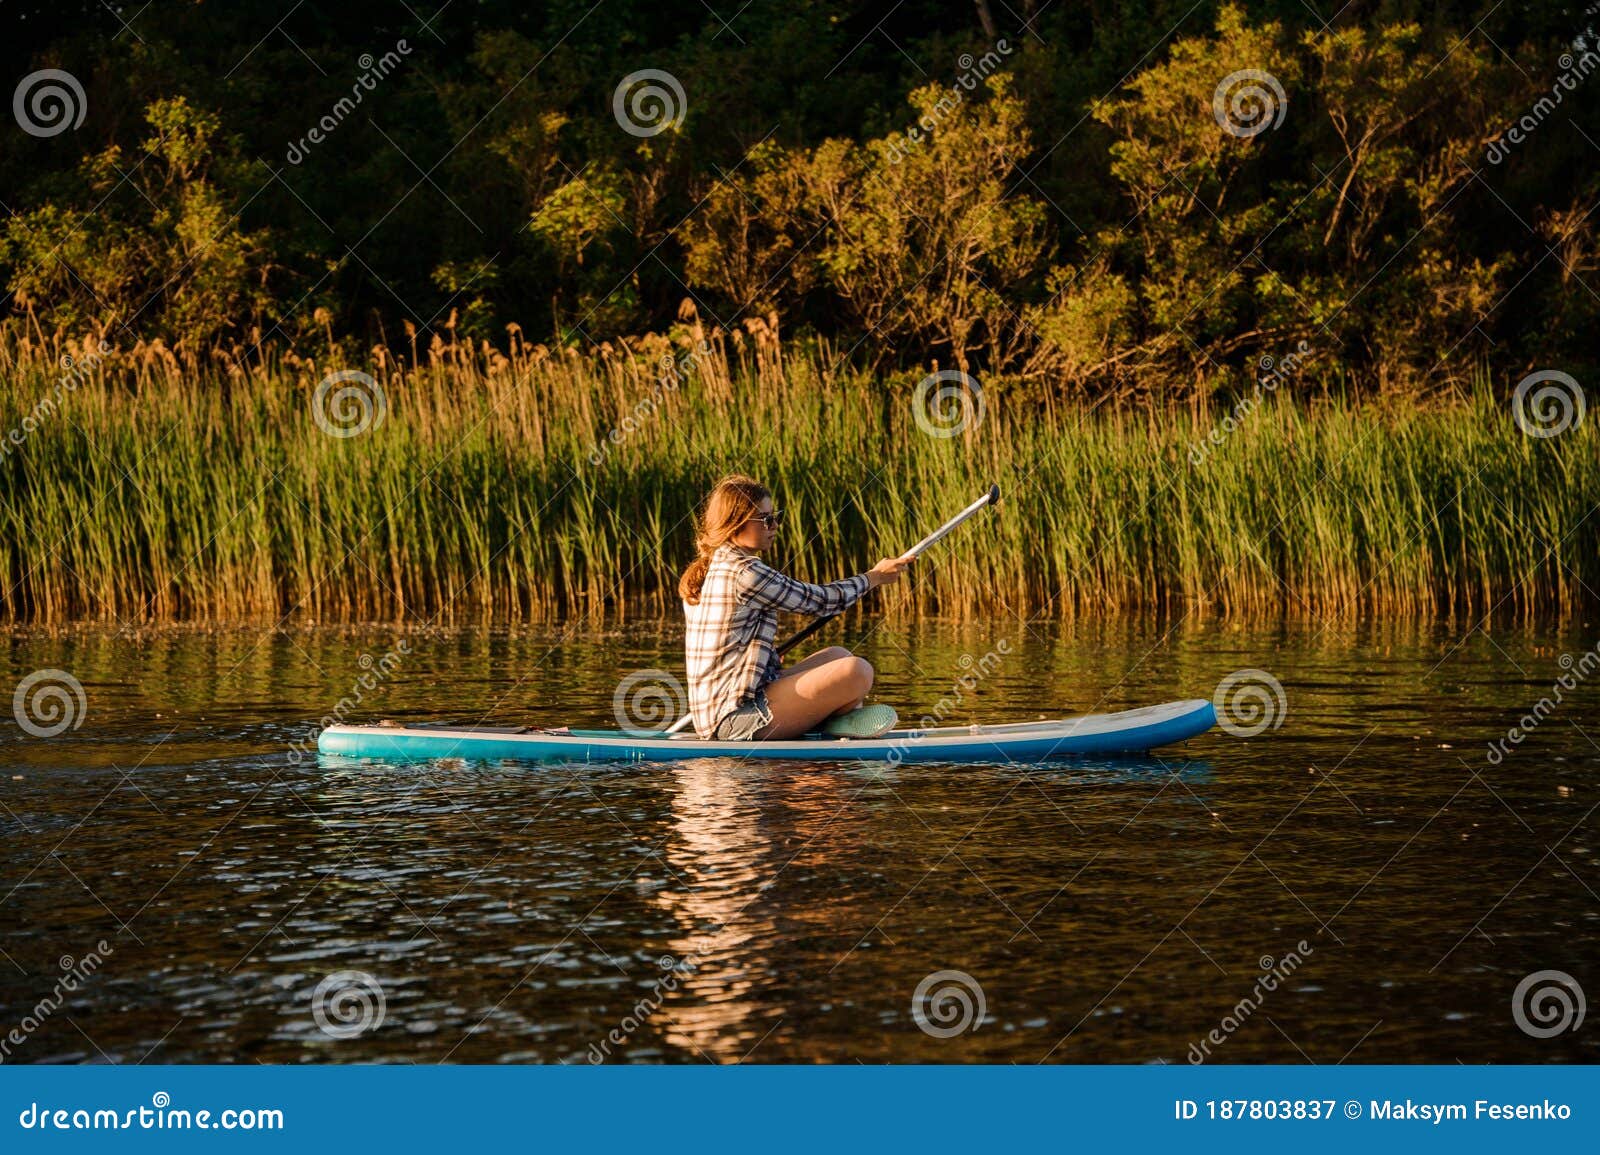 Young Woman Sits on Sup Board with Paddle in Her Hands and Floats on ...